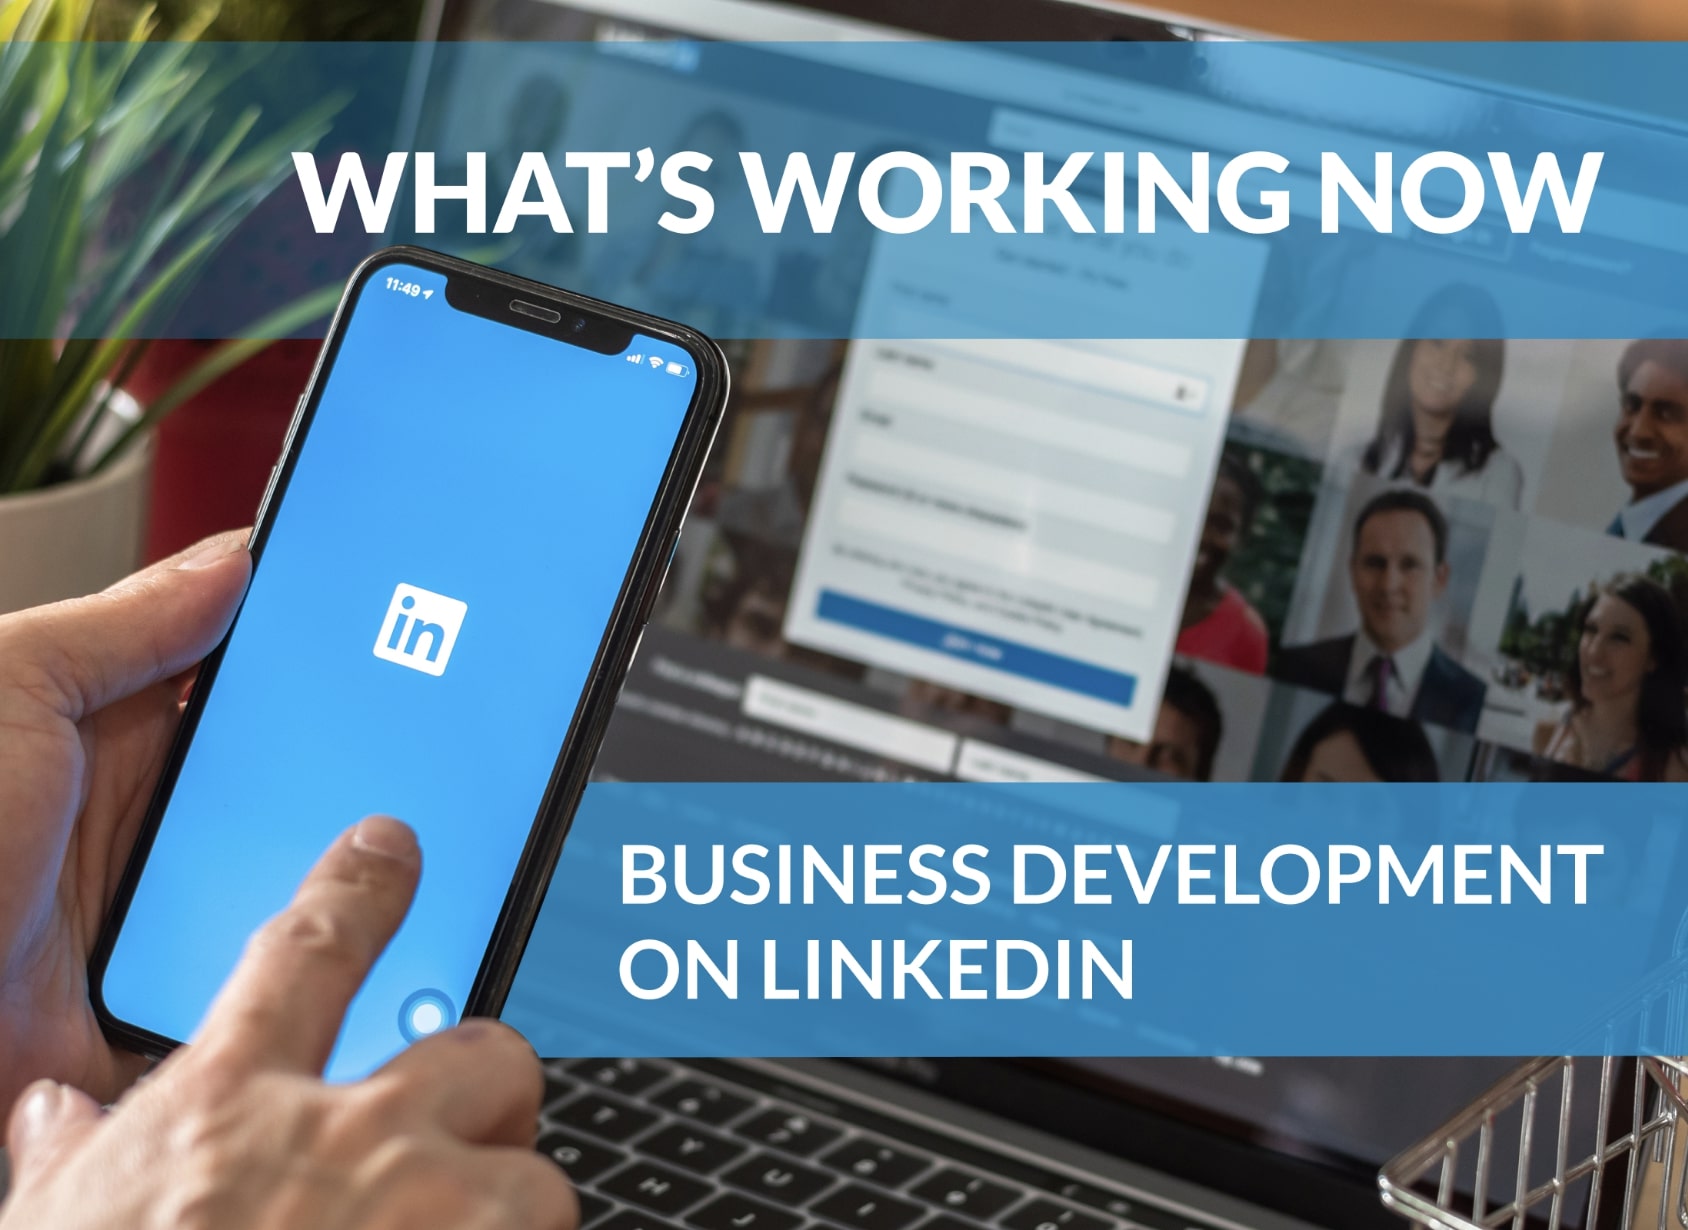 What’s Working Now on LinkedIn: Business Development